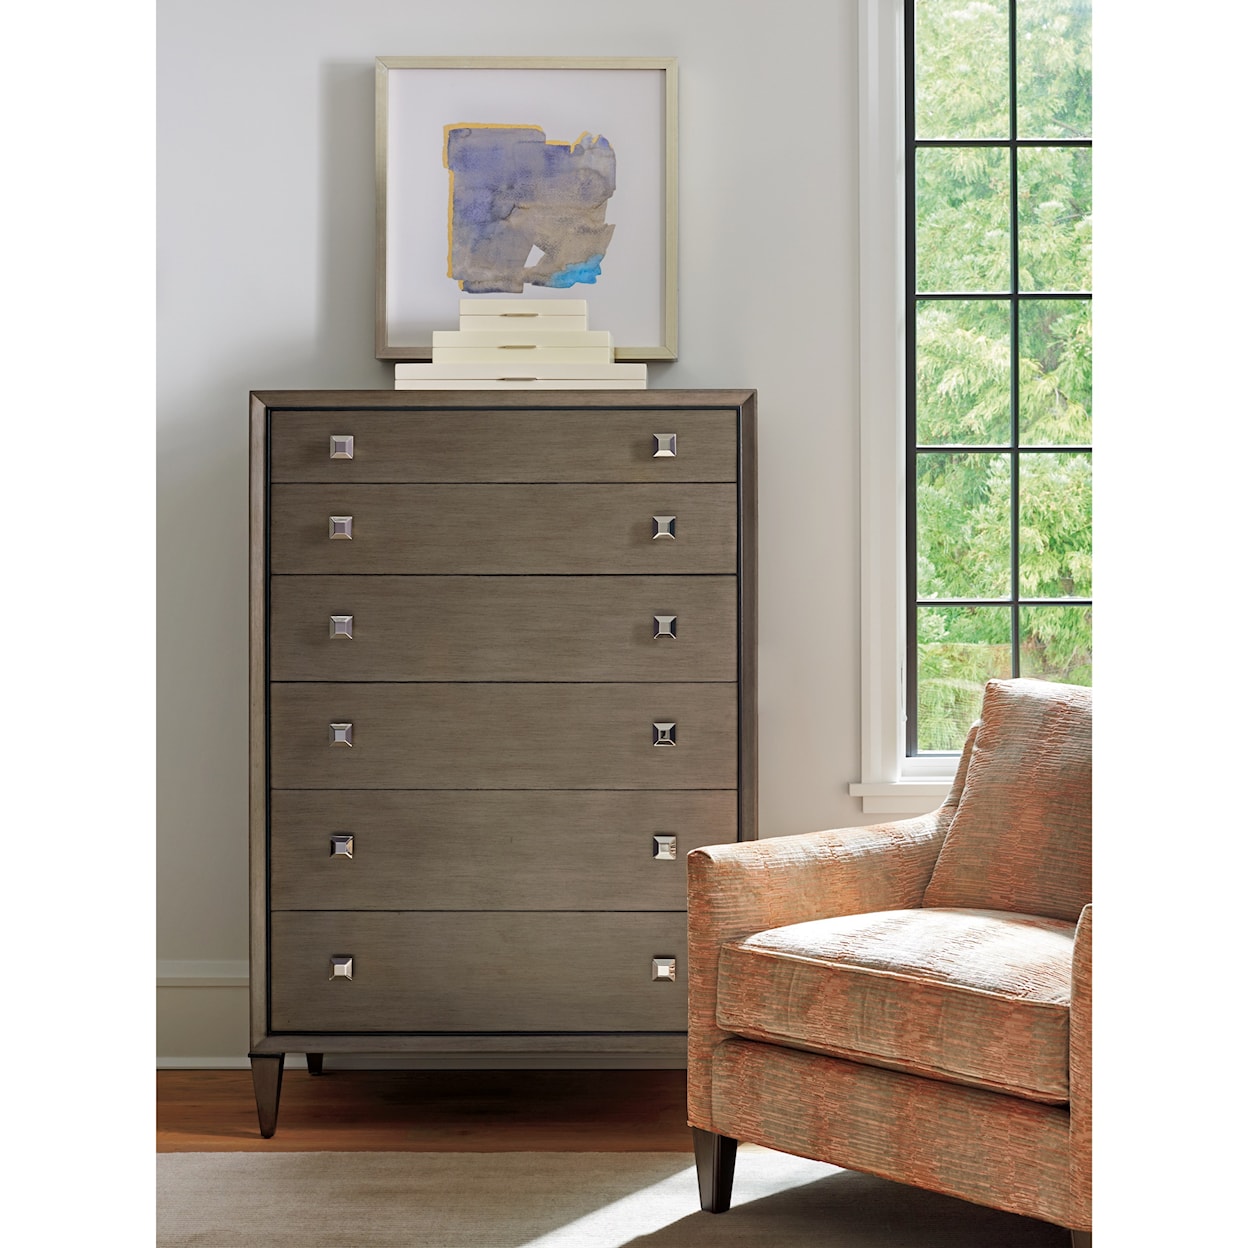 Lexington Ariana Remy Drawer Chest